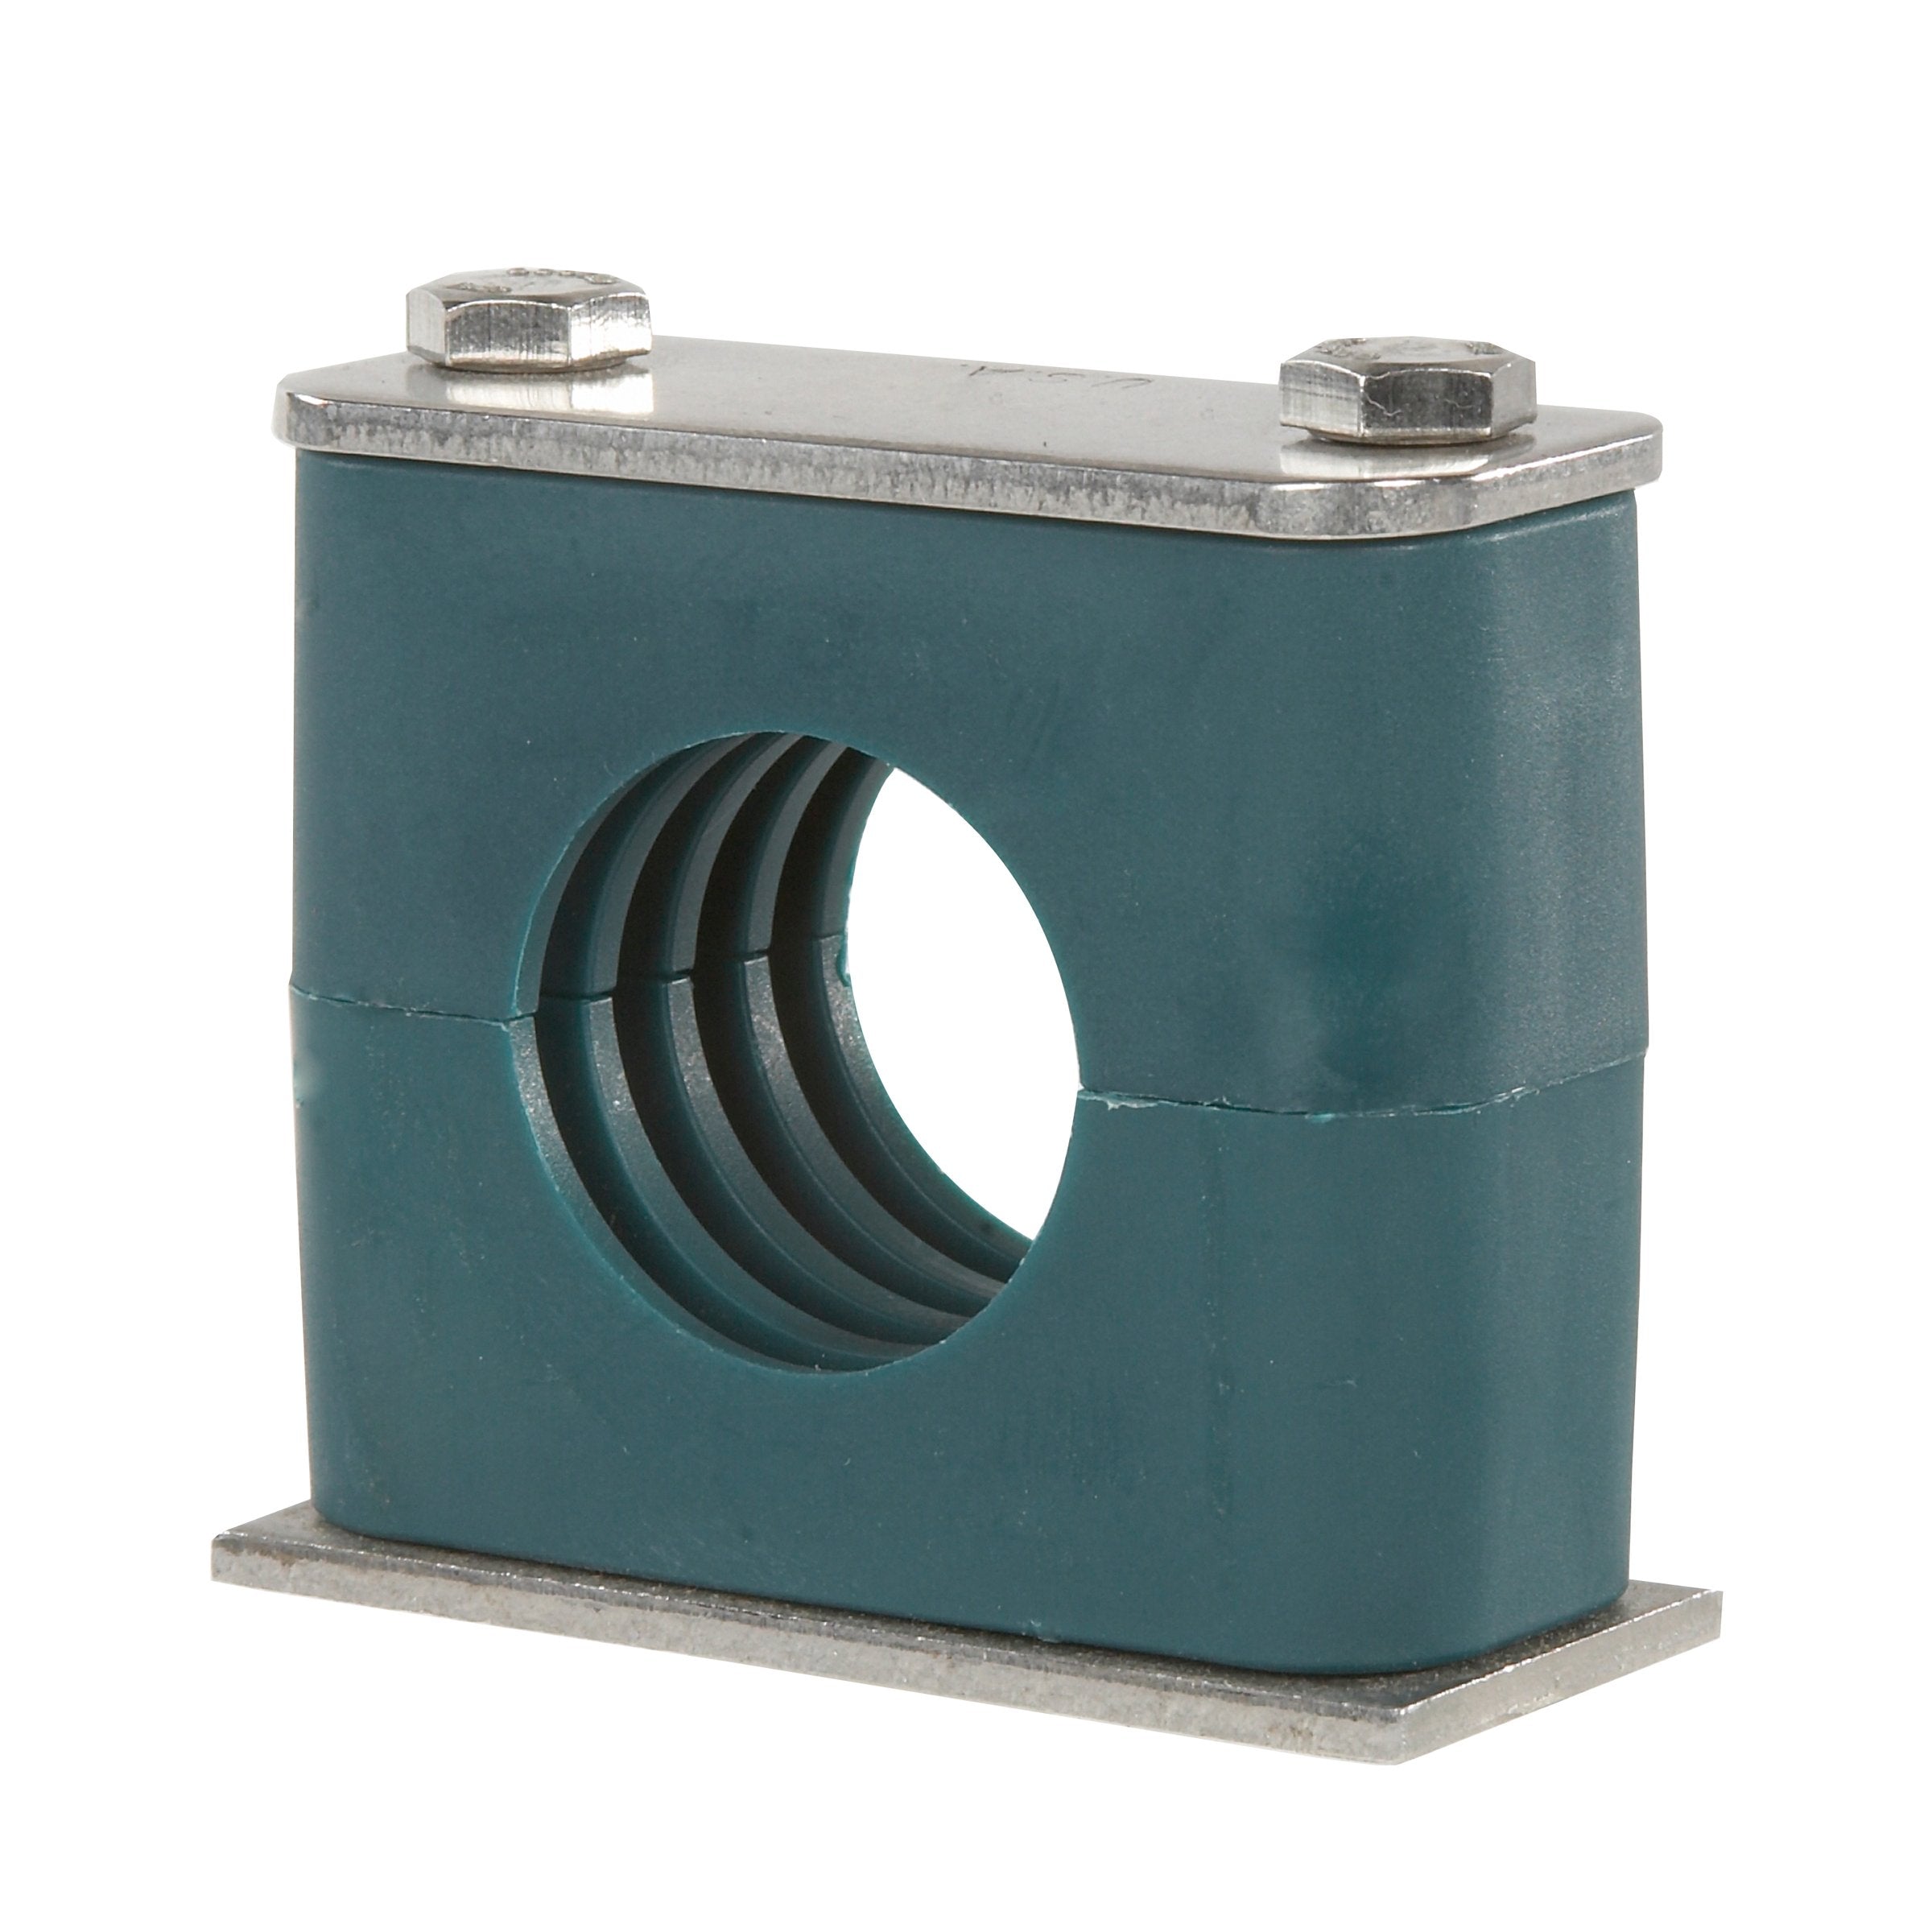 SP-773-PP-DP-AS-U-W10 : Stauff Clamp, Single Weld Plate, 2.874" (73mm) OD, for 2.5" Pipe, Green PP Insert, Profiled Interior, Carbon Steel